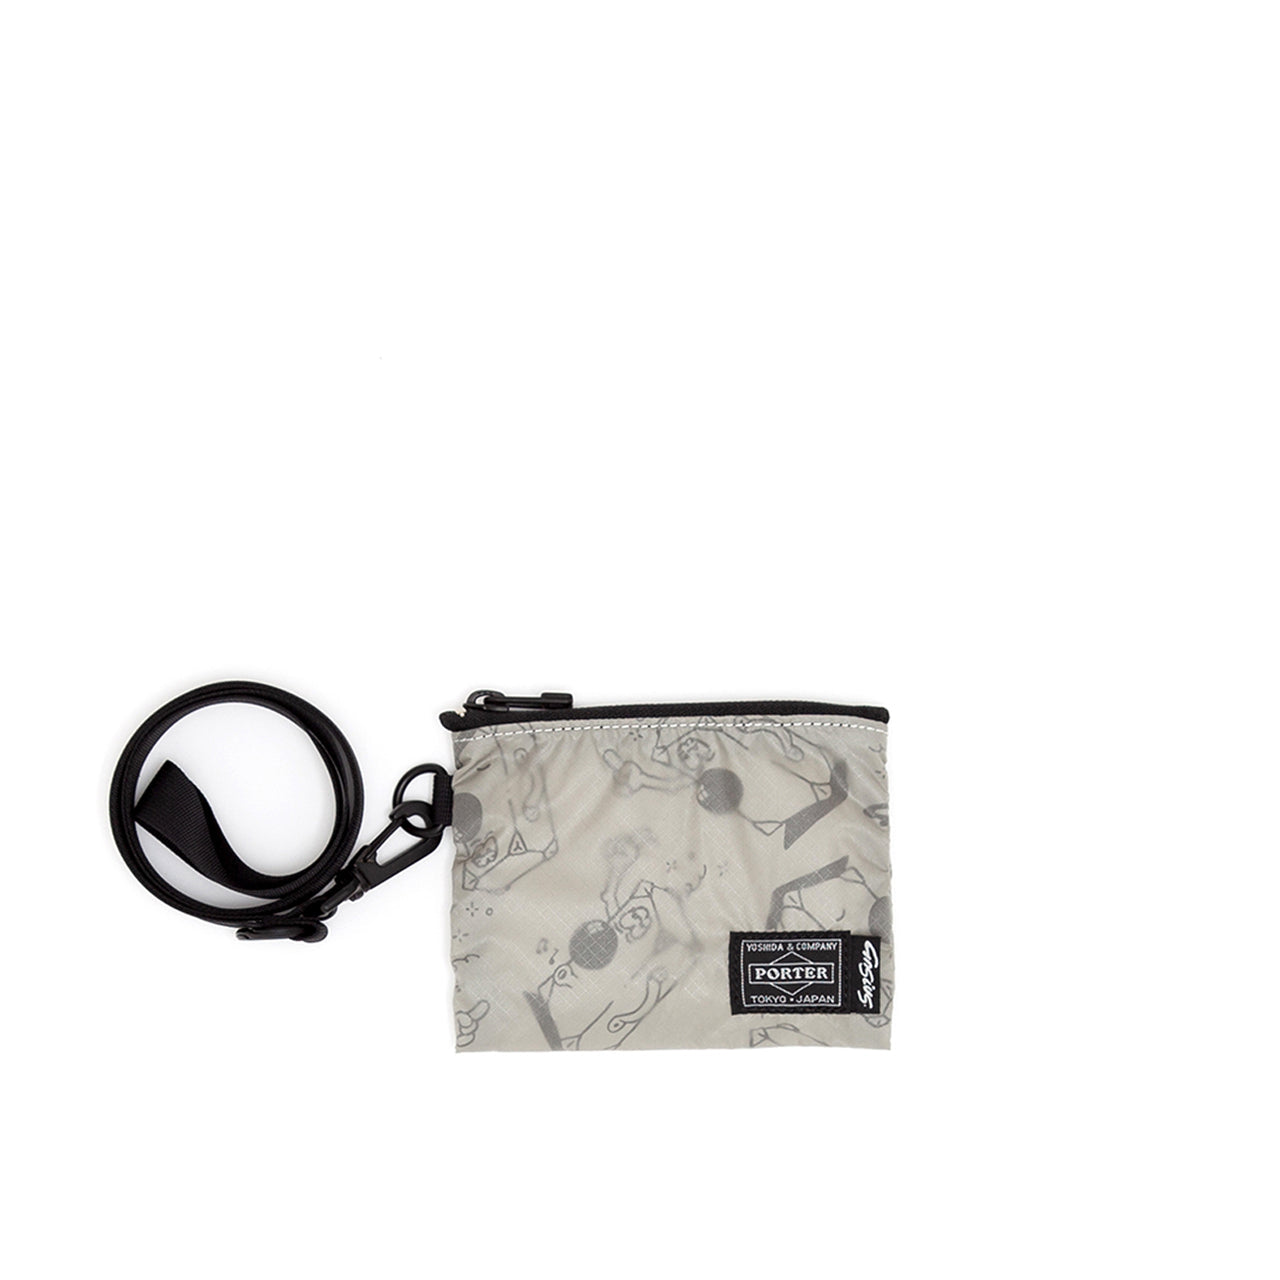 porter-yoshida & co. x gasius pouch and strap (grey)